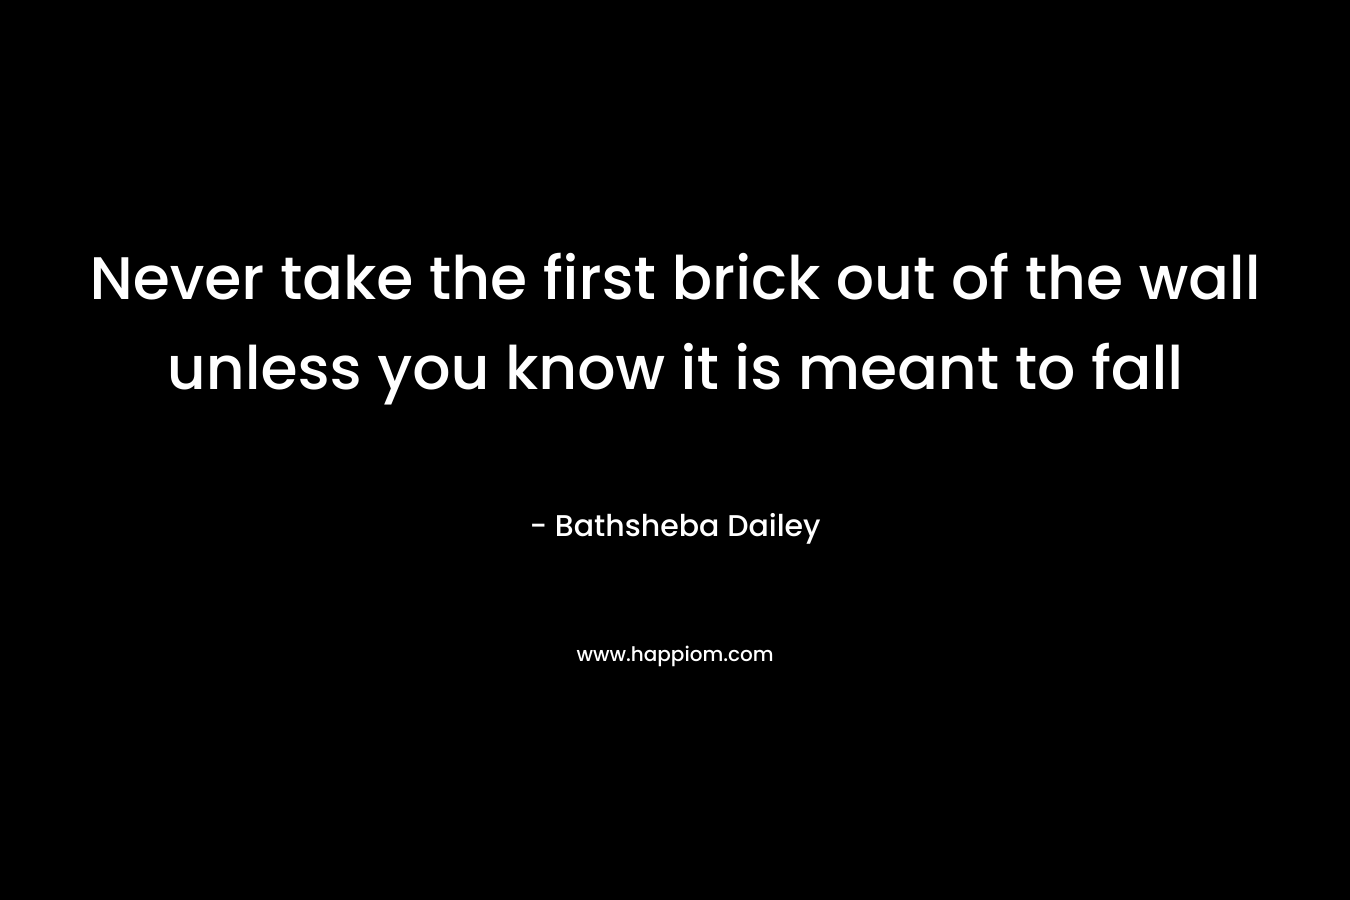 Never take the first brick out of the wall unless you know it is meant to fall – Bathsheba Dailey